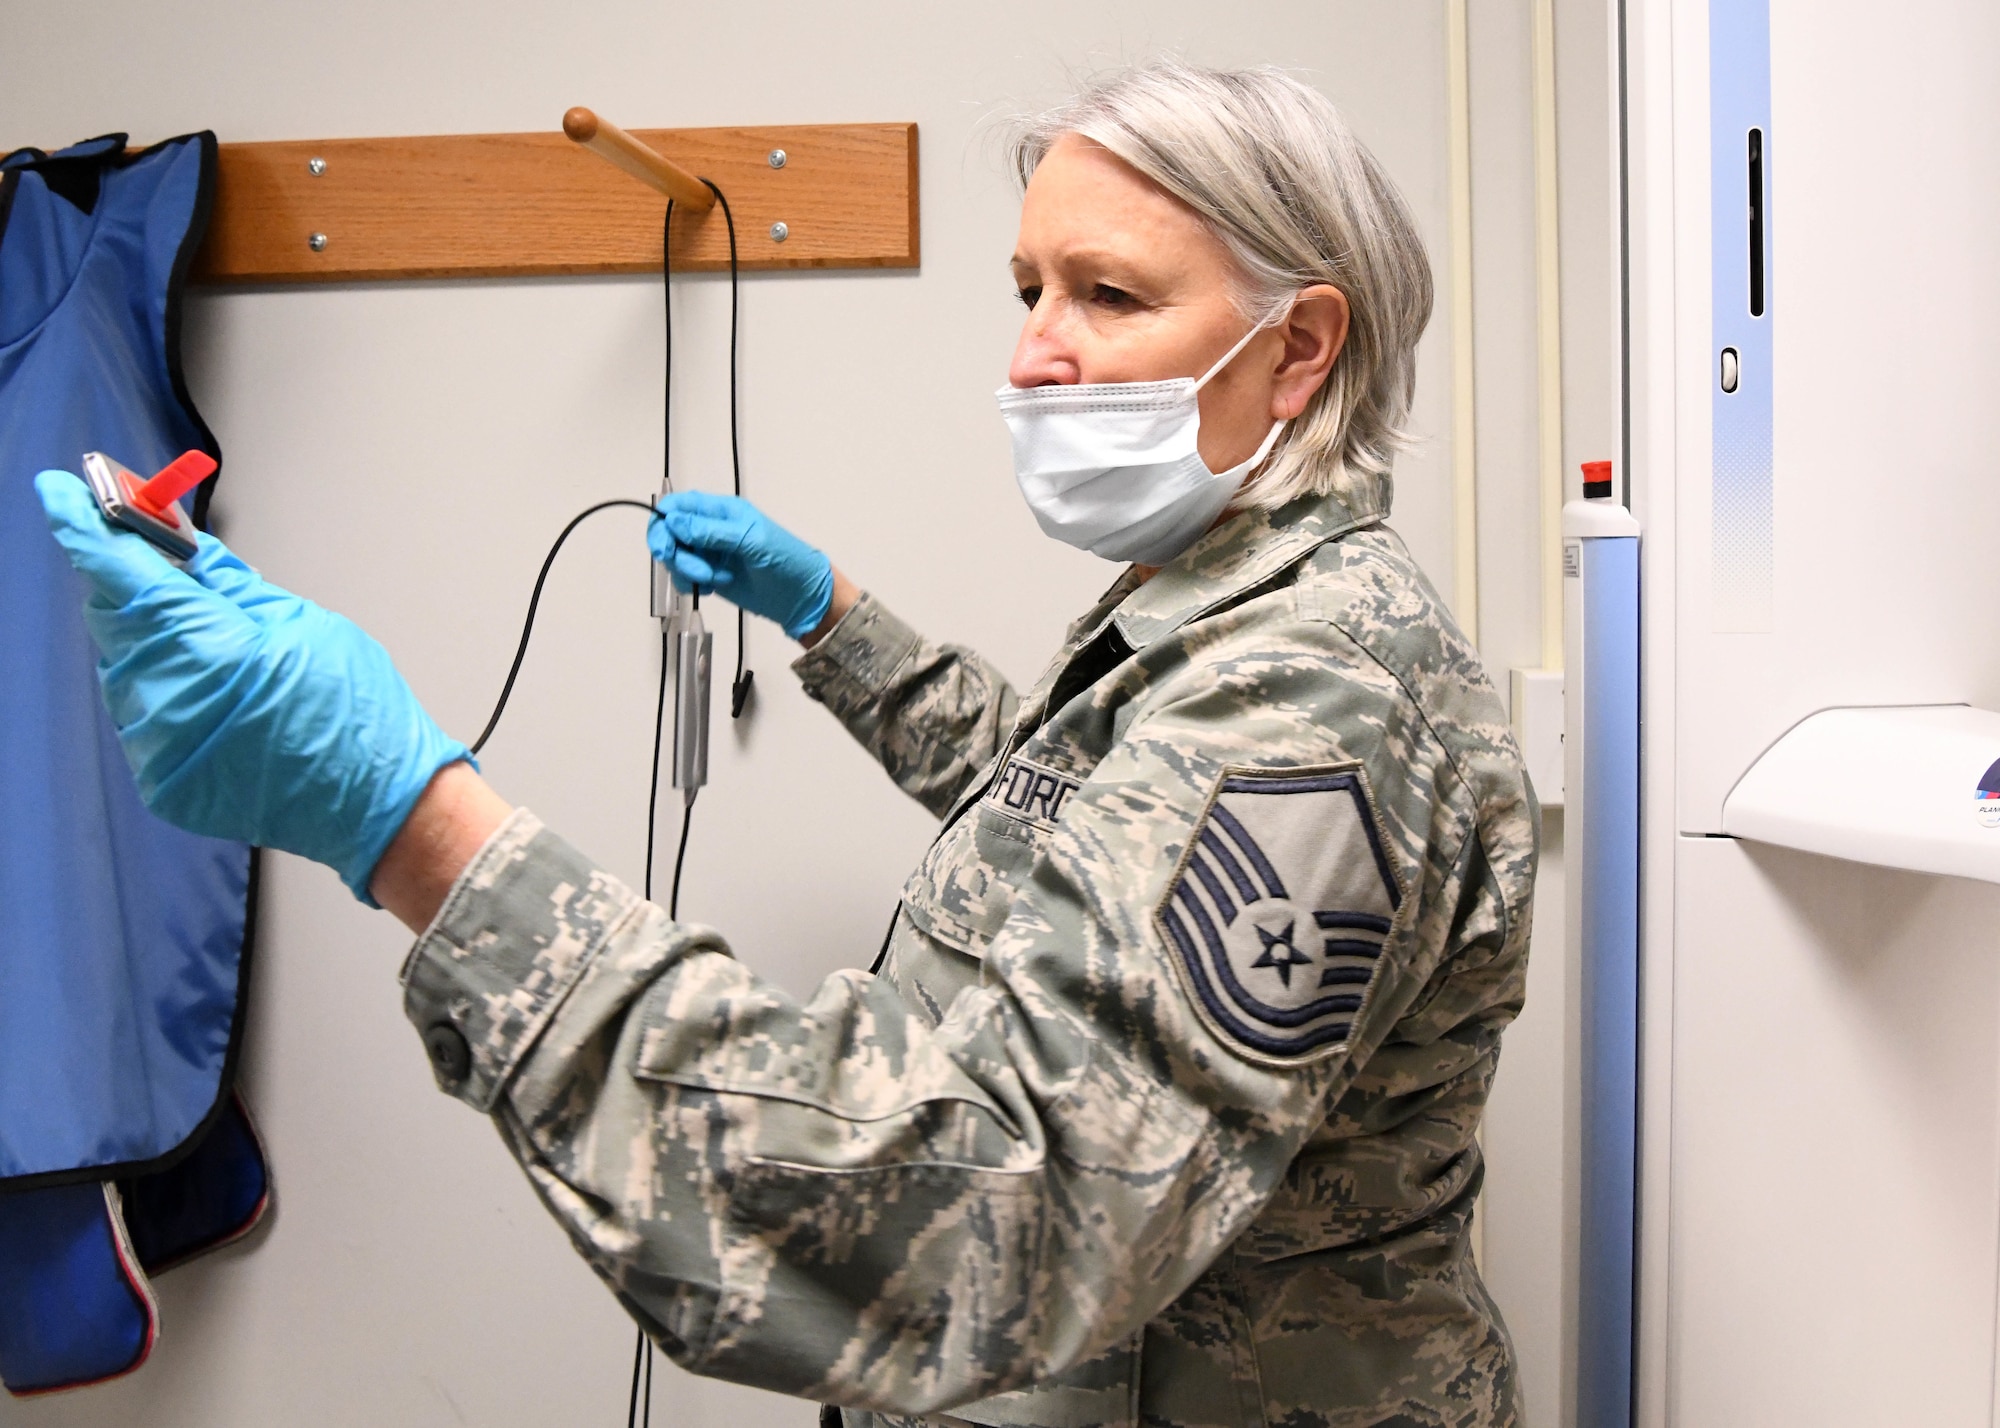 Master Sgt. Terrylee Crowther, 104th FW Dental Assistant puts on protective equipment for a dental examination. As the NCOIC of Dental at the 104th Fighter Wing, she ensures members are up to date on dental screenings so they can stay deployment ready. (U.S. Air National Guard Photo by Airman Camille Lienau)